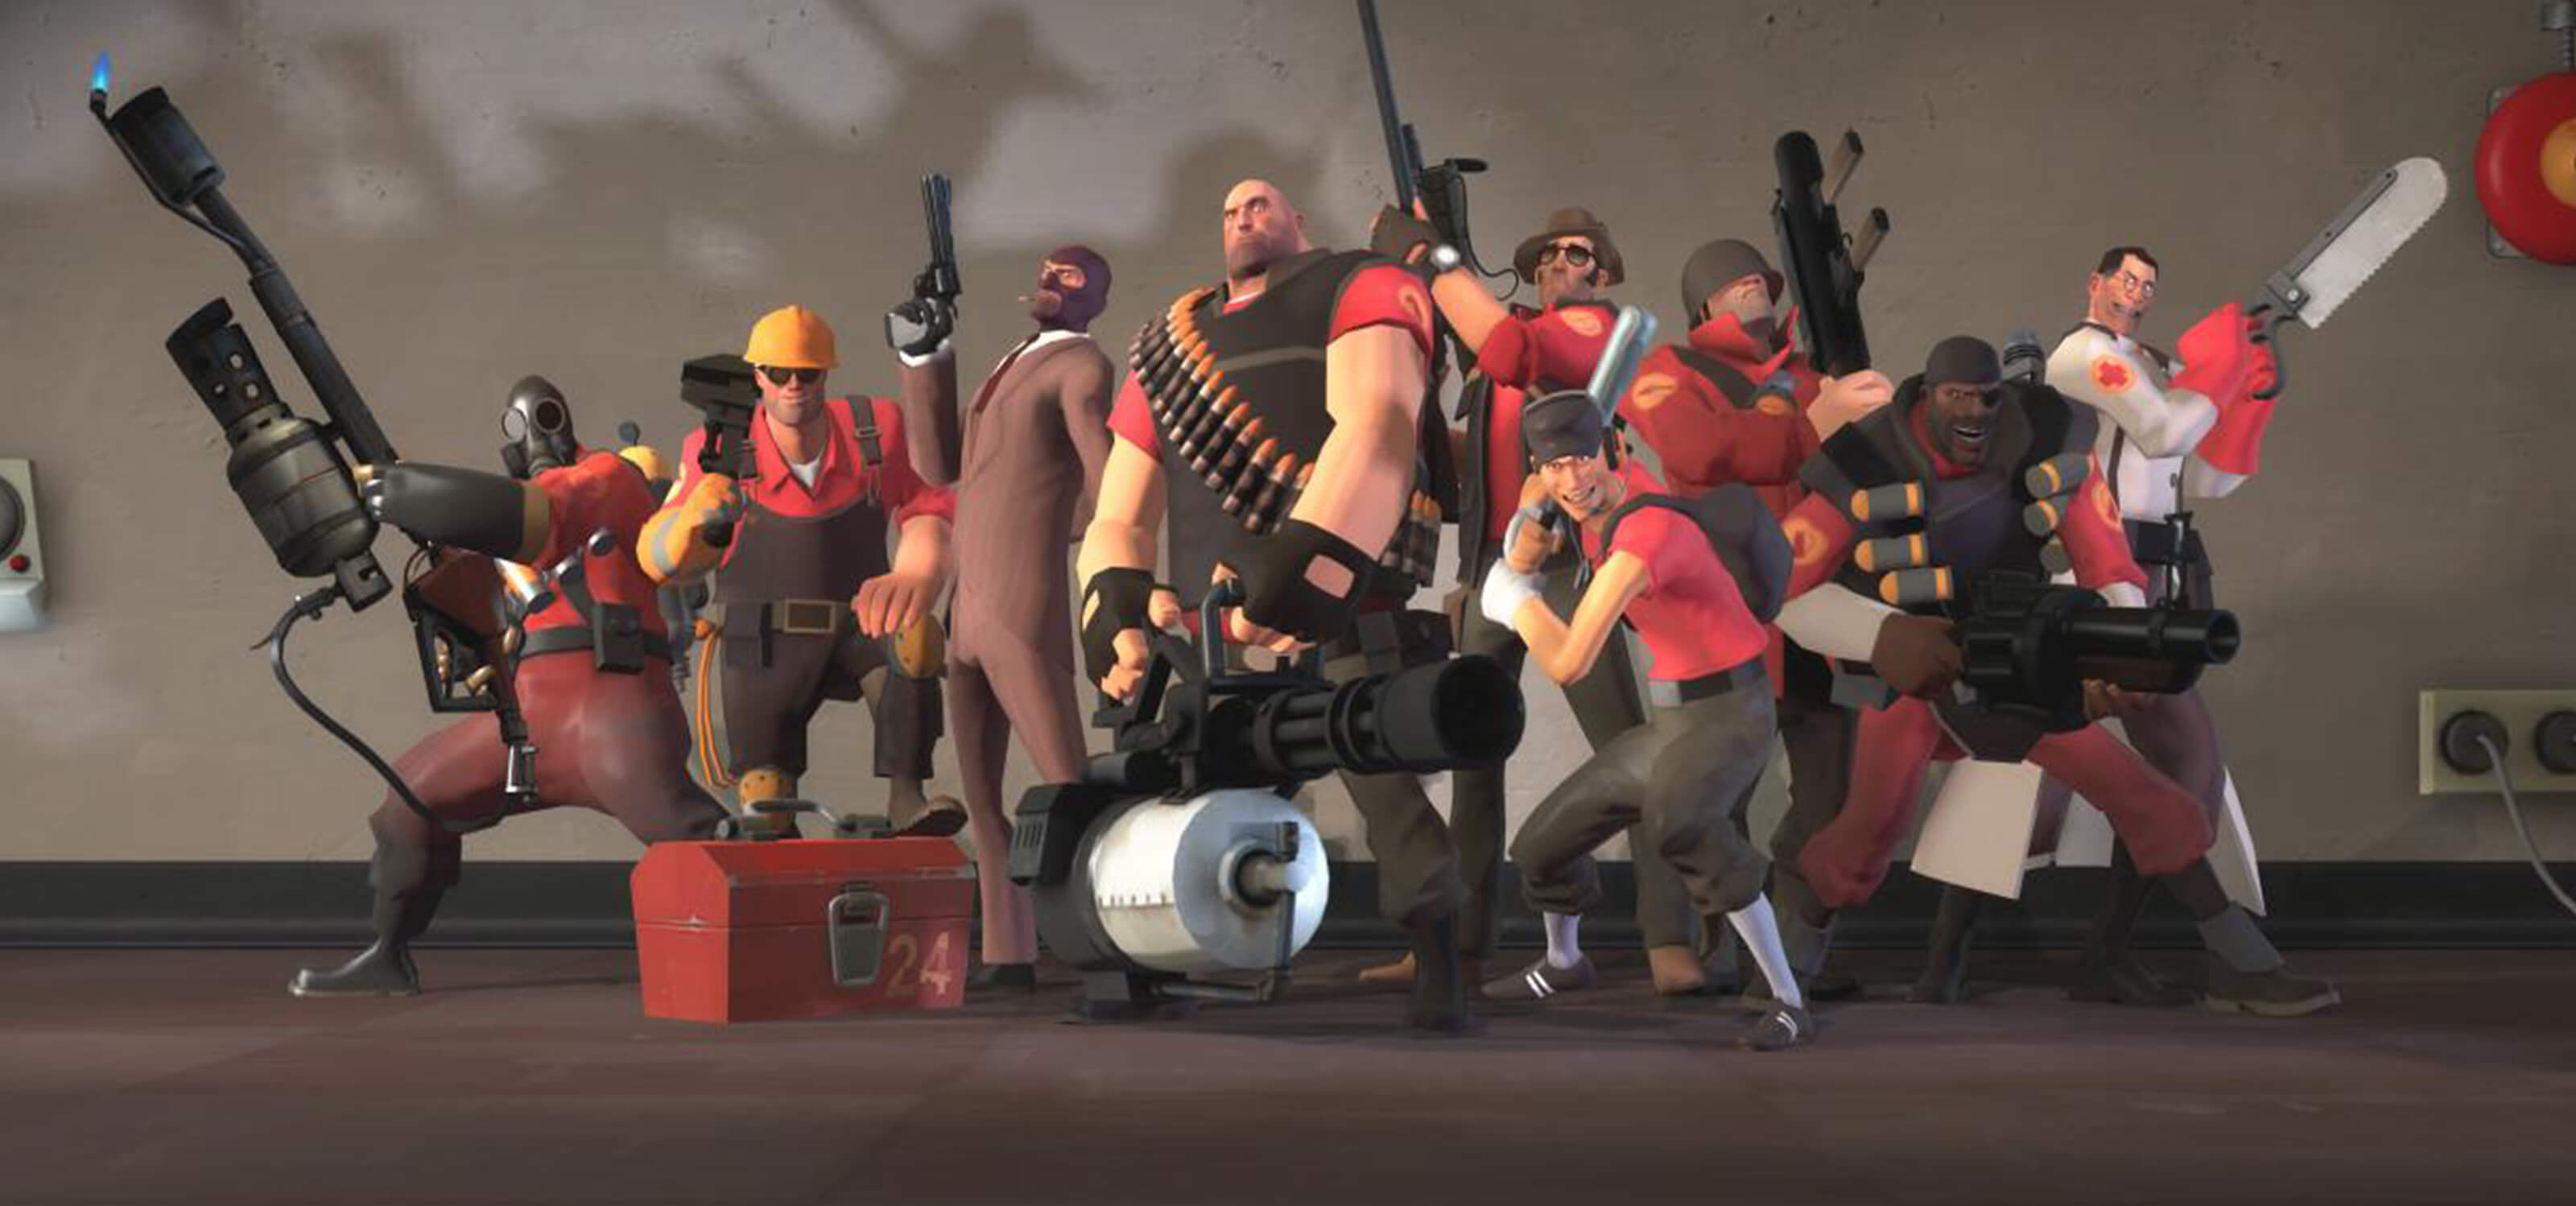 Eric Smith says some of his most memorable experiences at Valve came from working on Team Fortress 2.